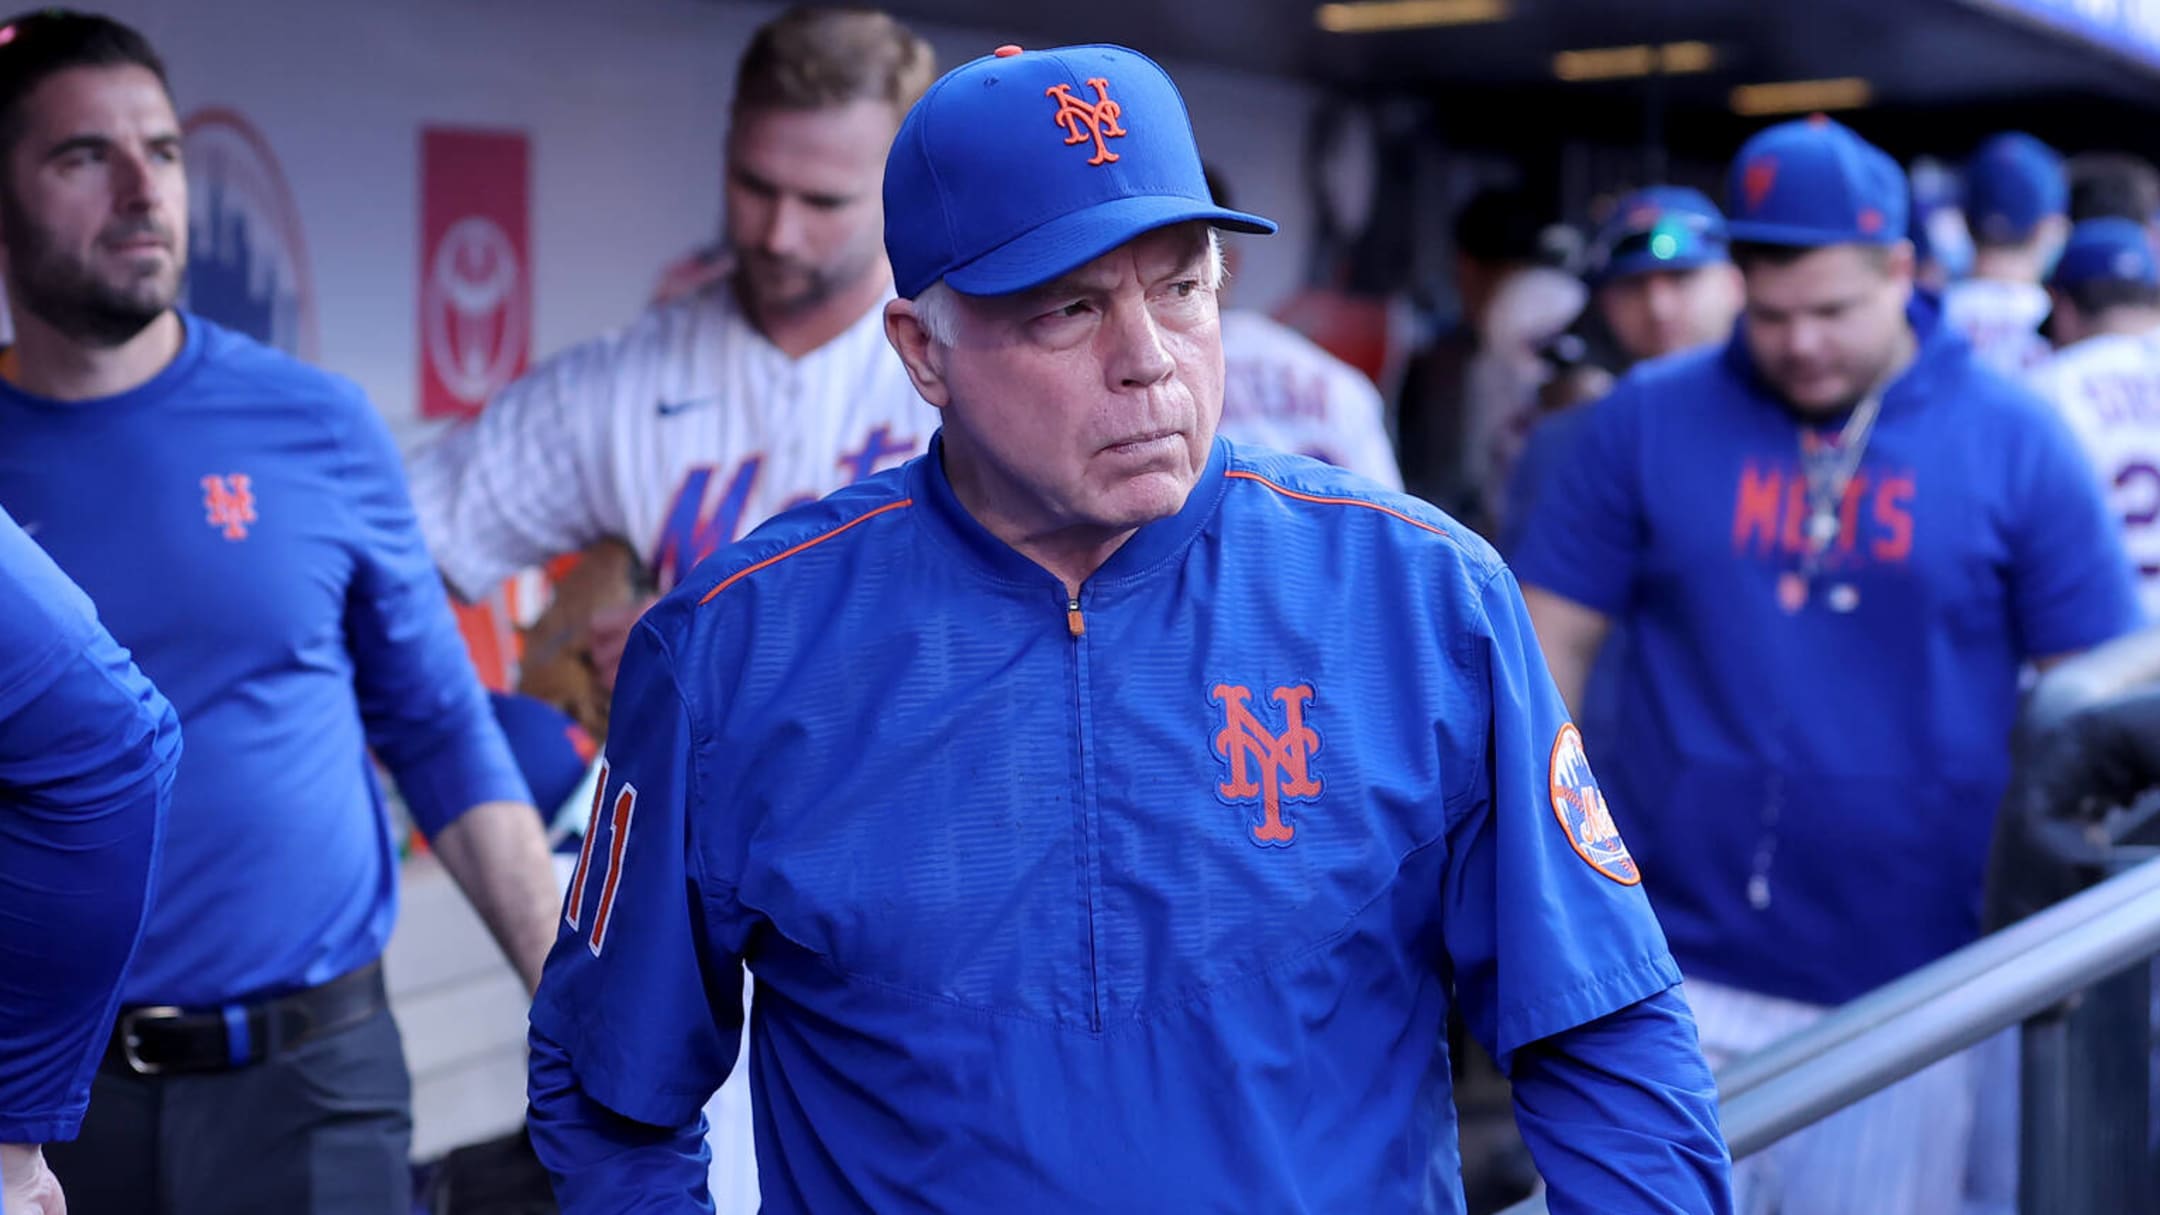 Buck Showalter May Have Just Given Us The Greatest Stare In